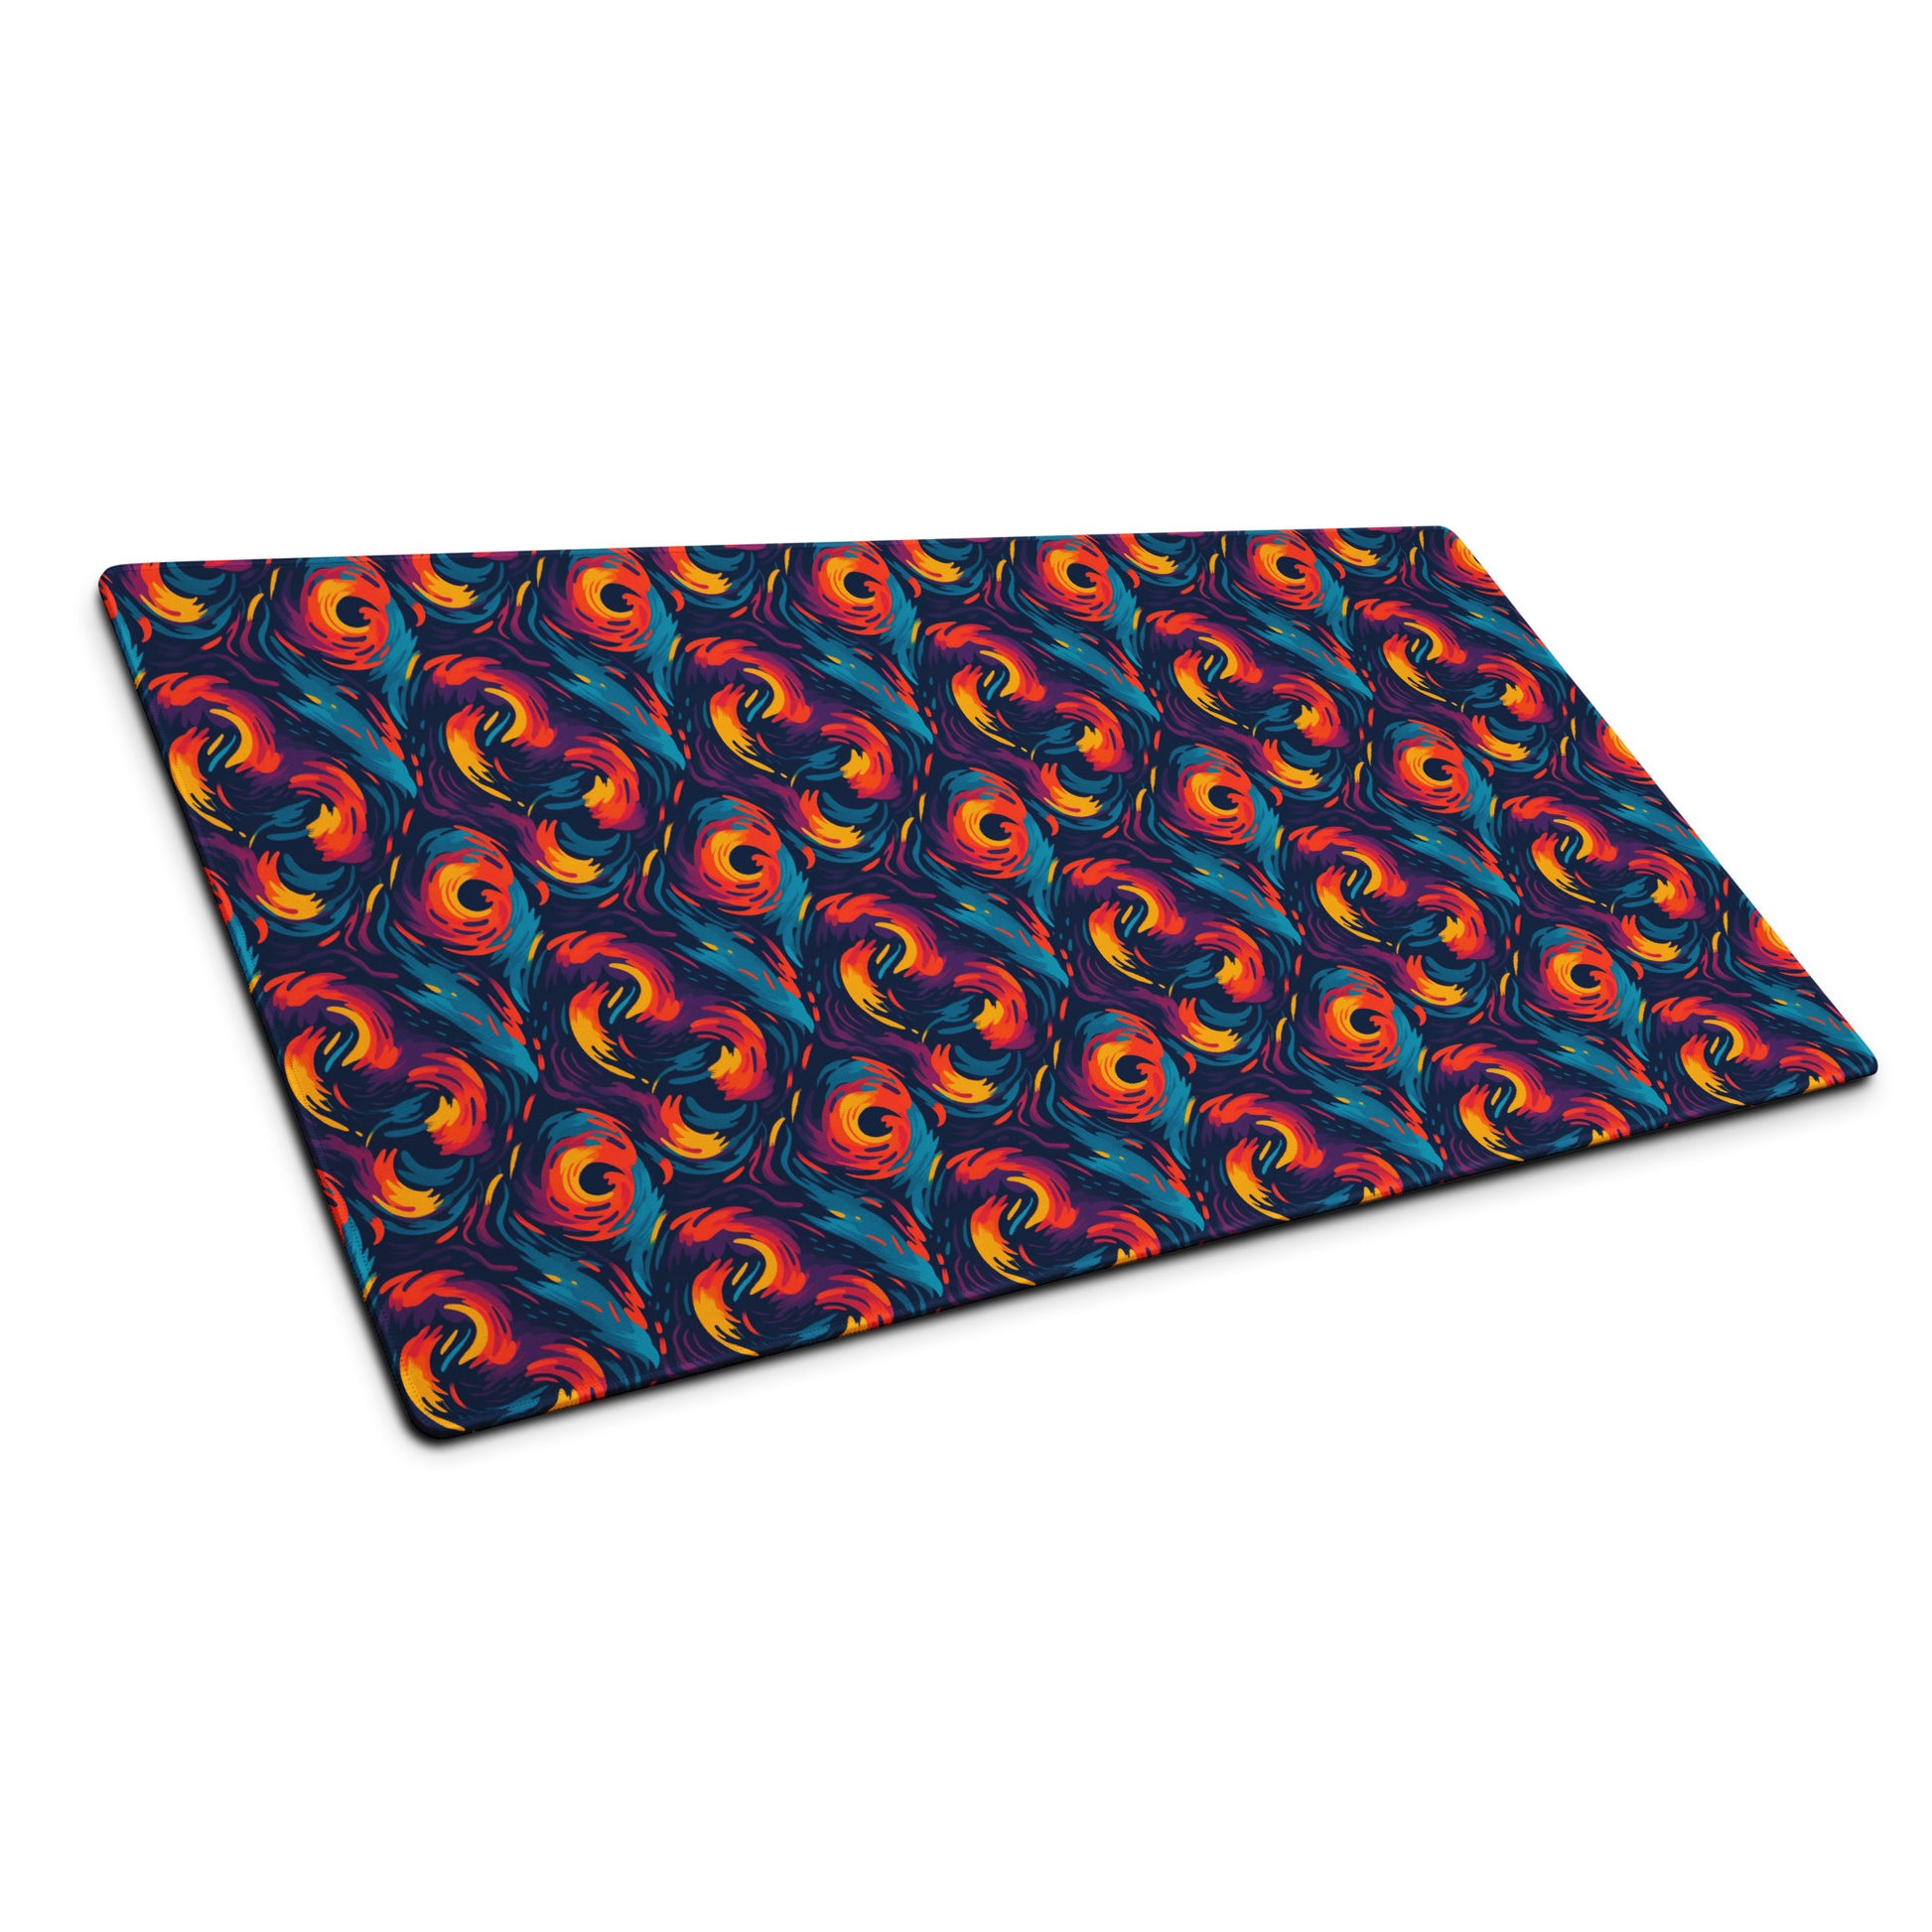 A 36" x 18" desk pad with fiery swirls on it shown at an angle. Red and Blue in color.